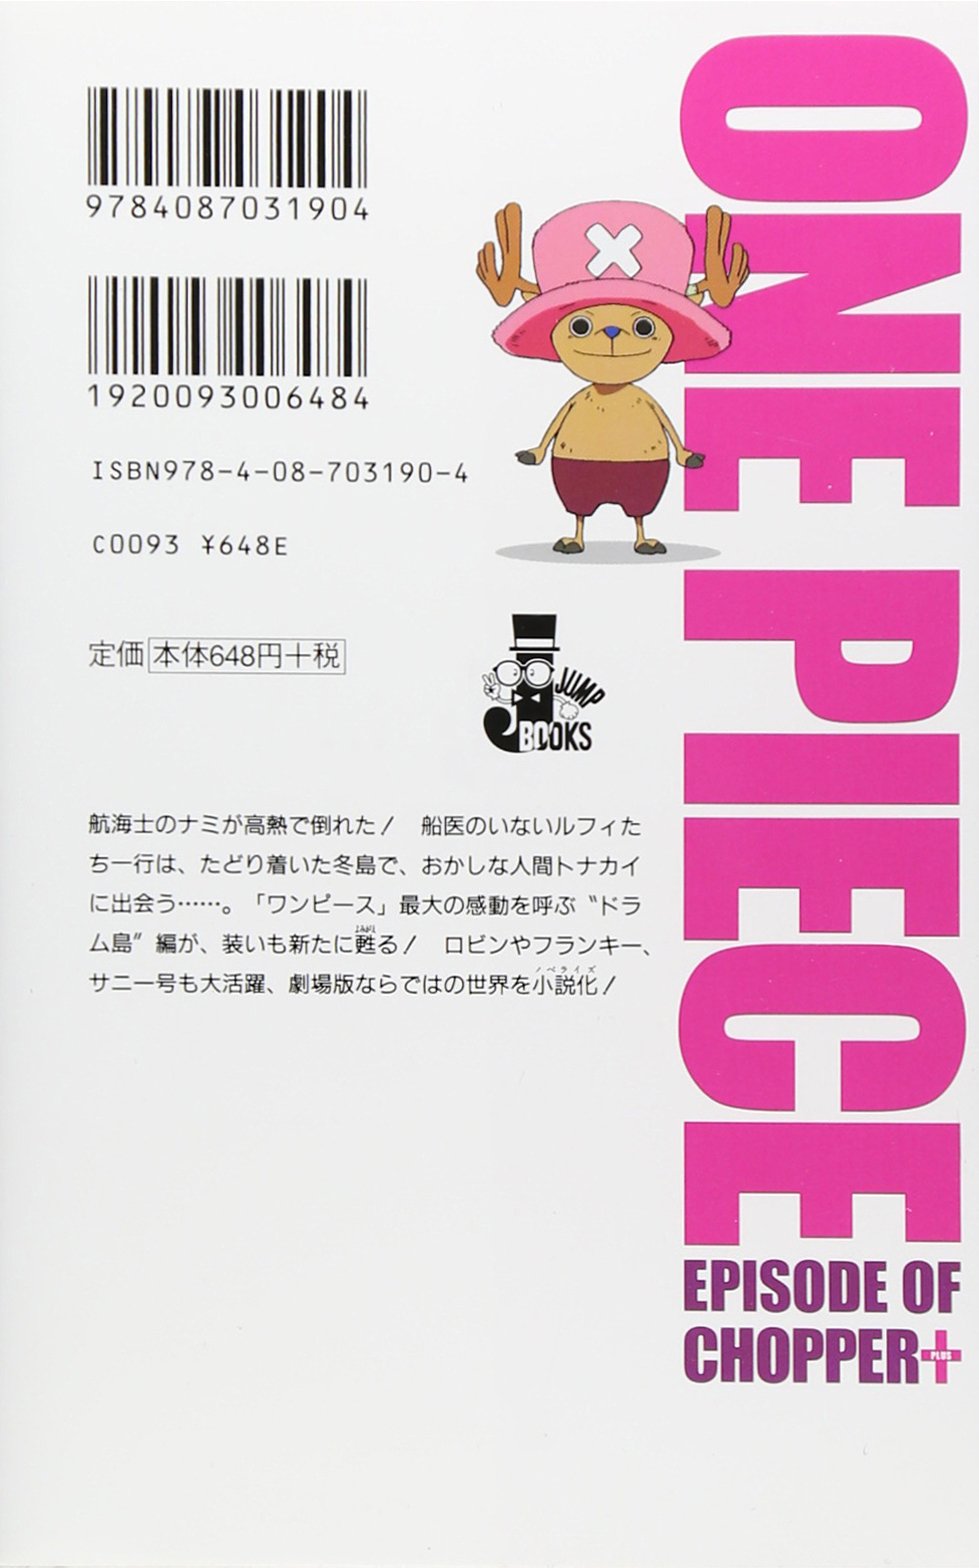 One Piece Episode Of Chopper Plus Bloom In Winter Miracle Sakura Japanese Book Store